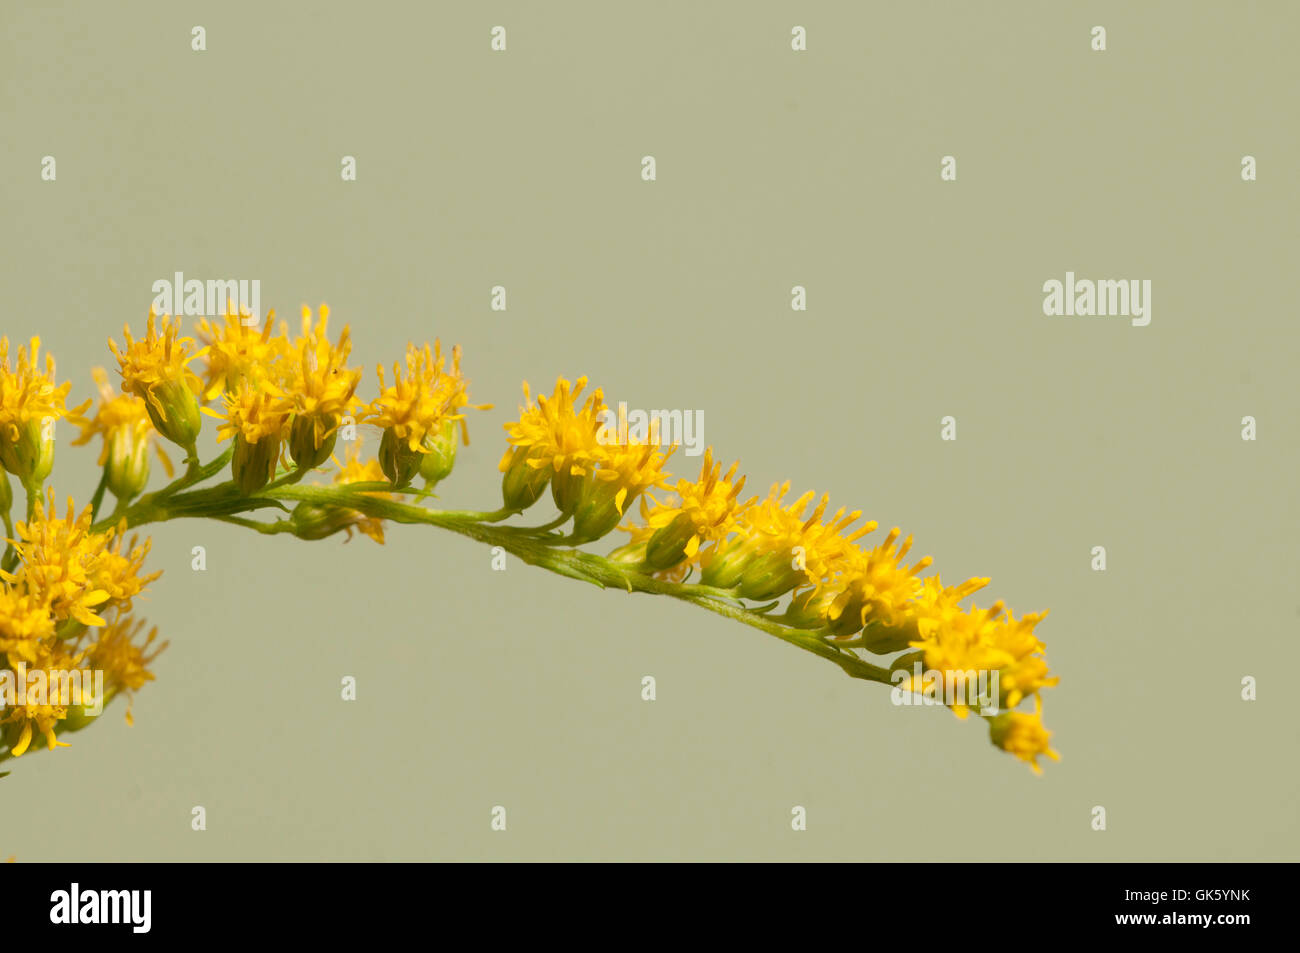 Solidago flowers over green background, close up Stock Photo